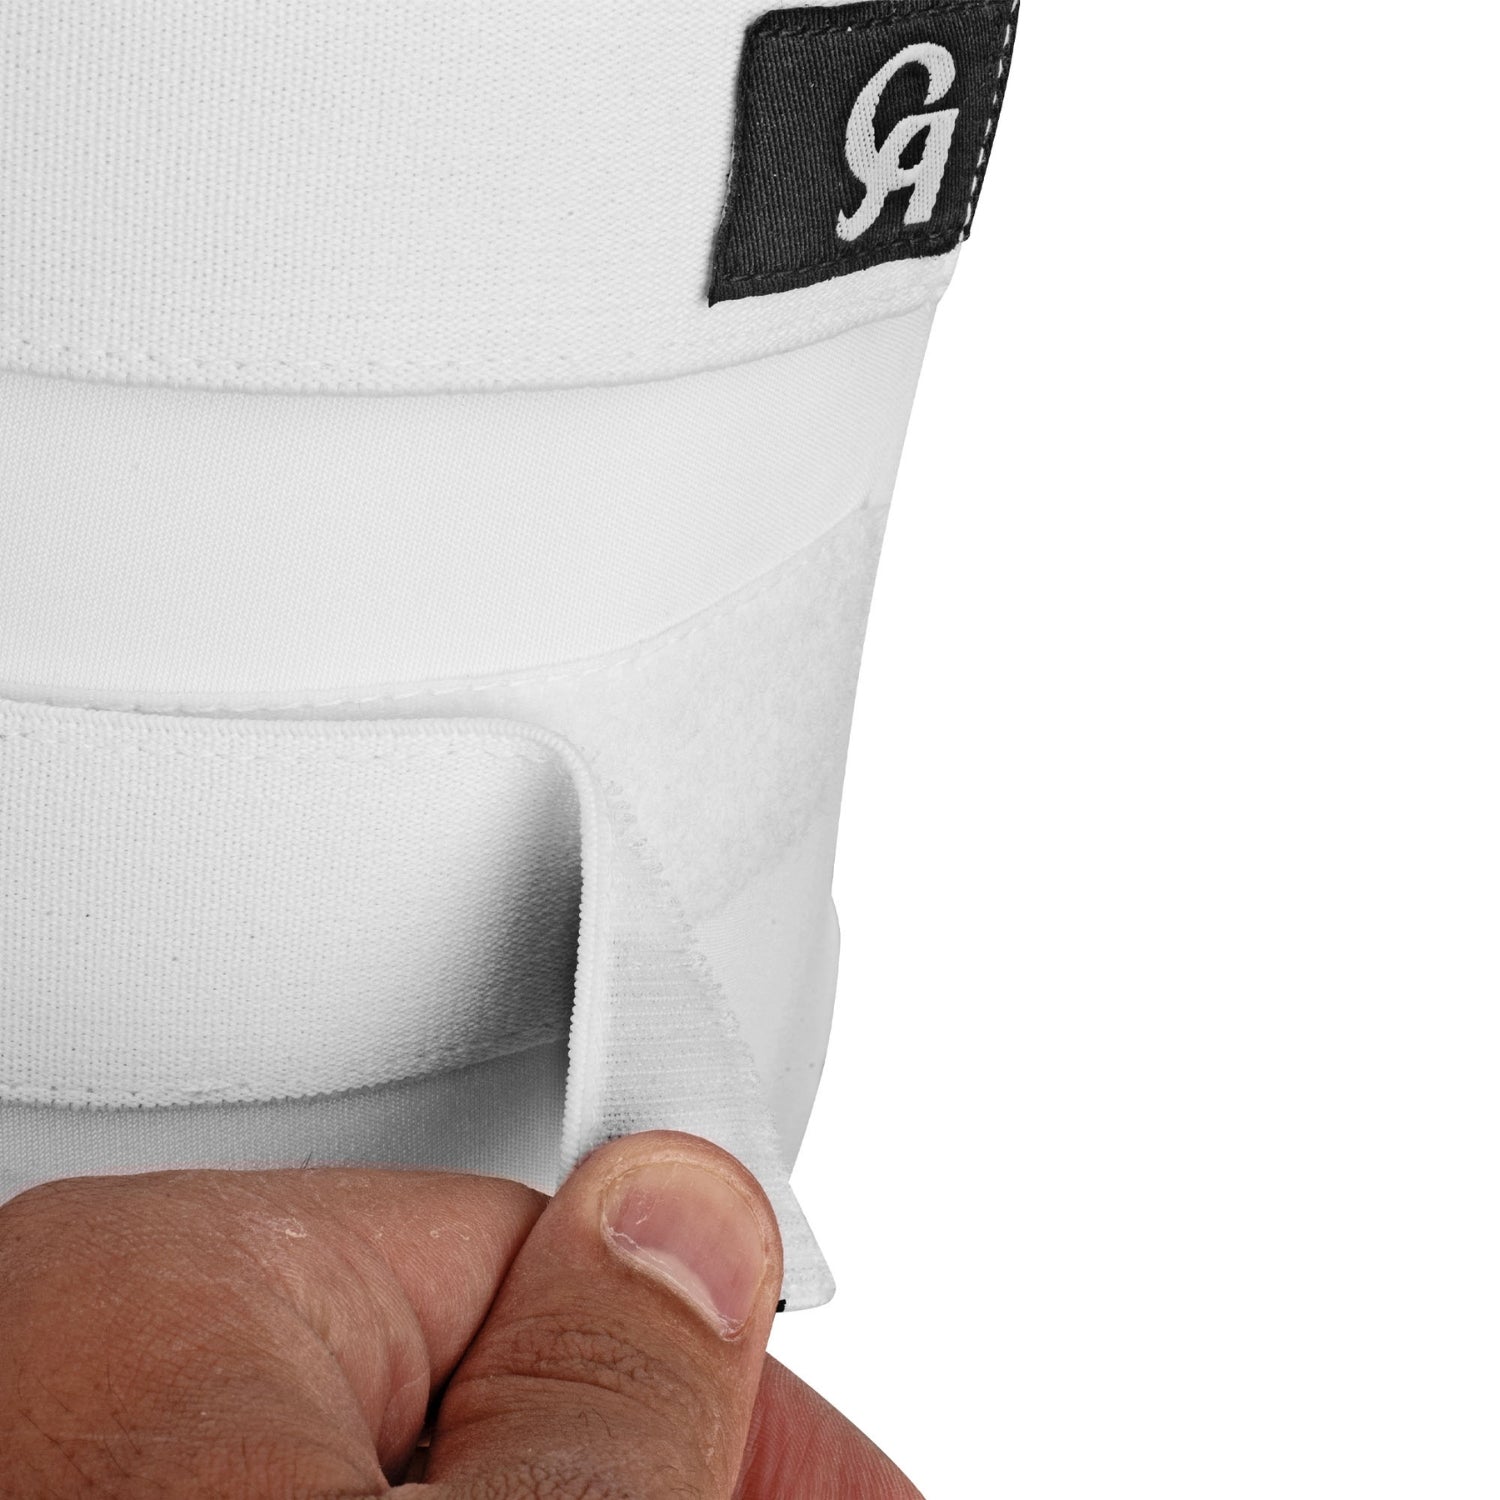 CA Thigh Pads, CA PERFORMANCE 15000, Adult